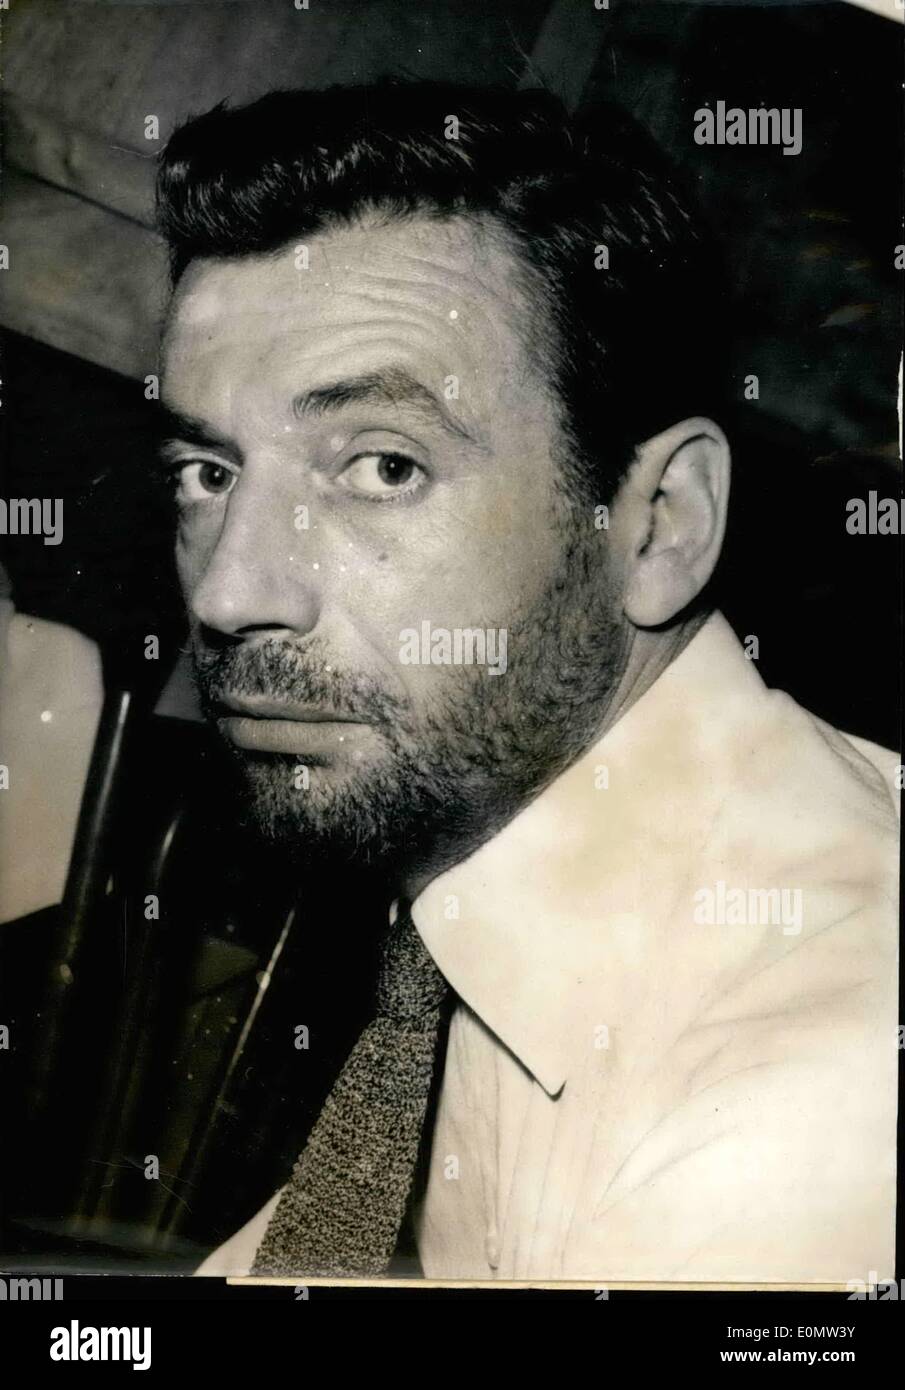 Jul. 07, 1956 - Who's The Bearded Man? This Is What Yves Montand. The Famous French Crooner And Actor, Will Look Like In The ''Witches Of Salem'', A Film Based On Arthur Miller's Play Made Into A Screen Version By Jean Paul Sartre. Montand's Wife, Simone Signoret, Is Playing Opposite Him As Elizabeth Proctor. Stock Photo